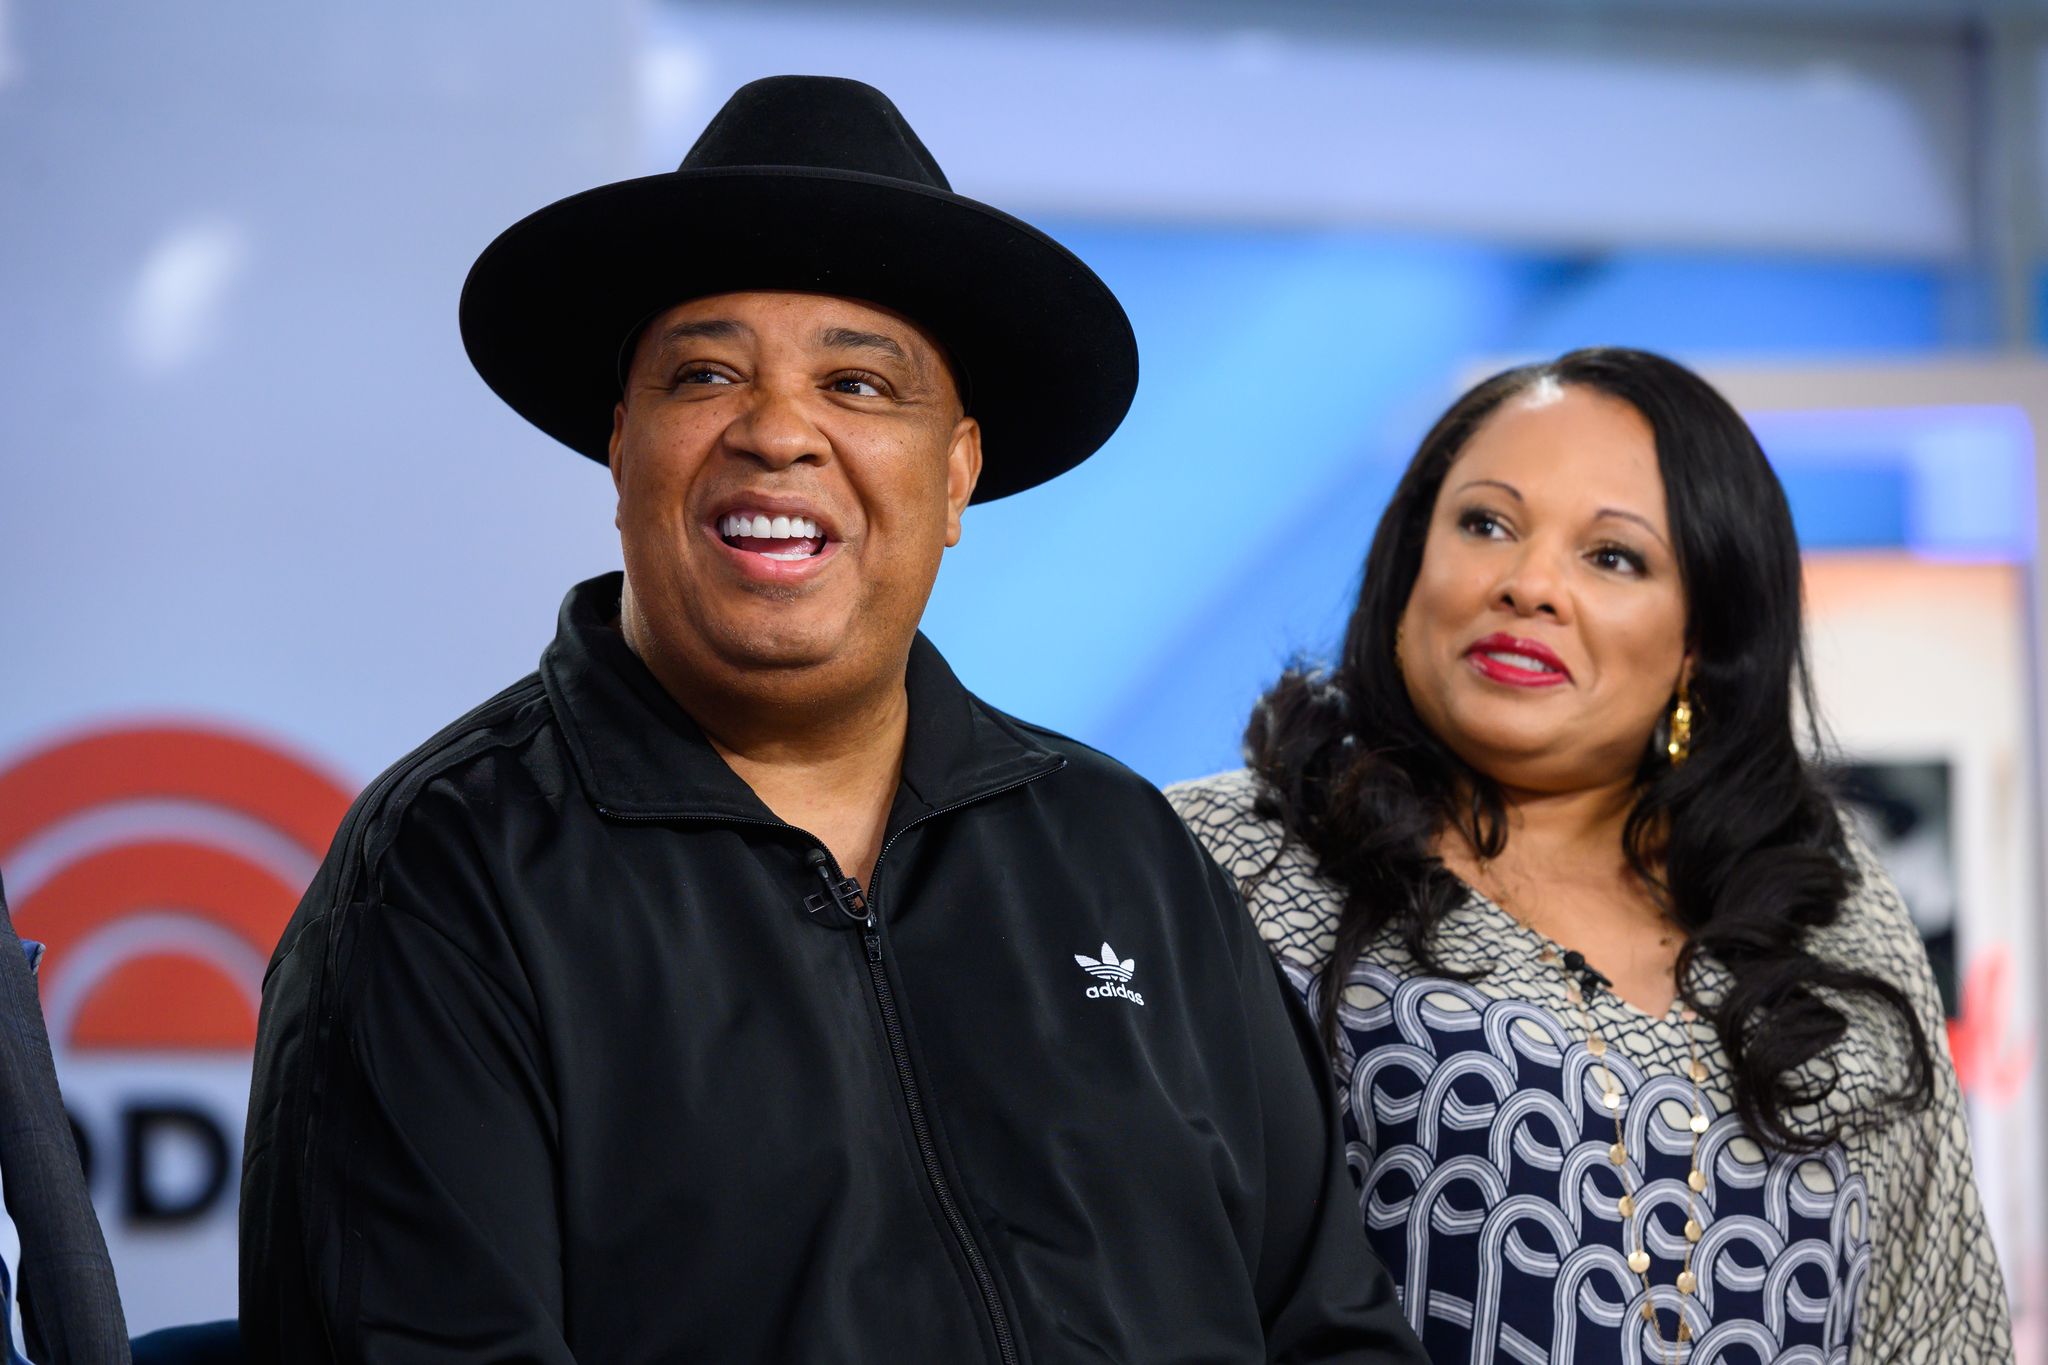 Justine Simmons and Rev Run on Tuesday, January 28, 2020. [unspecified location] | Photo: Getty Images